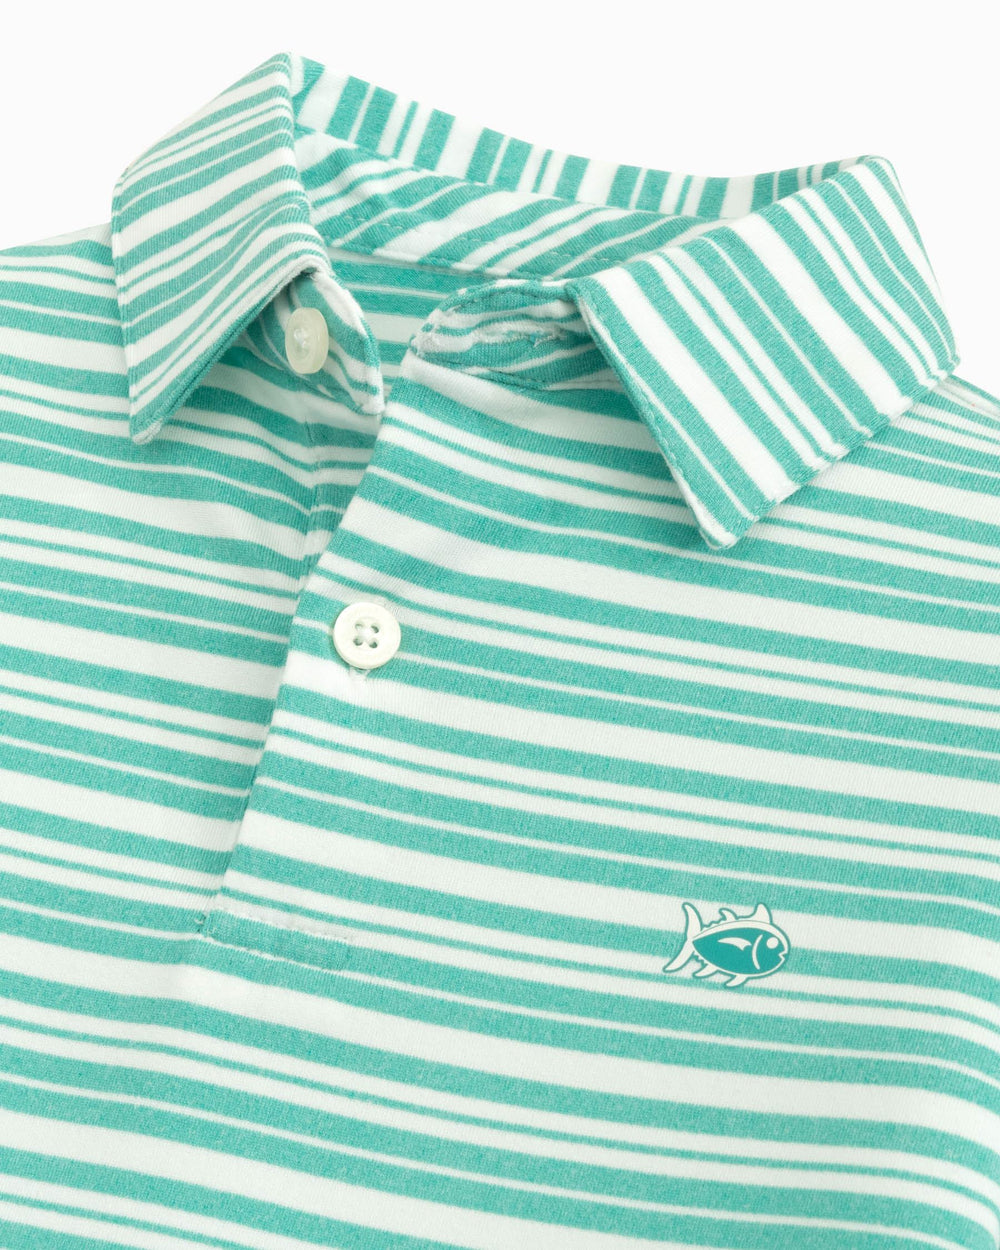 The detail view of the Southern Tide Youth Ryder Heather Bombay Stripe Performance Polo Shirt by Southern Tide - Heather Tidal Wave